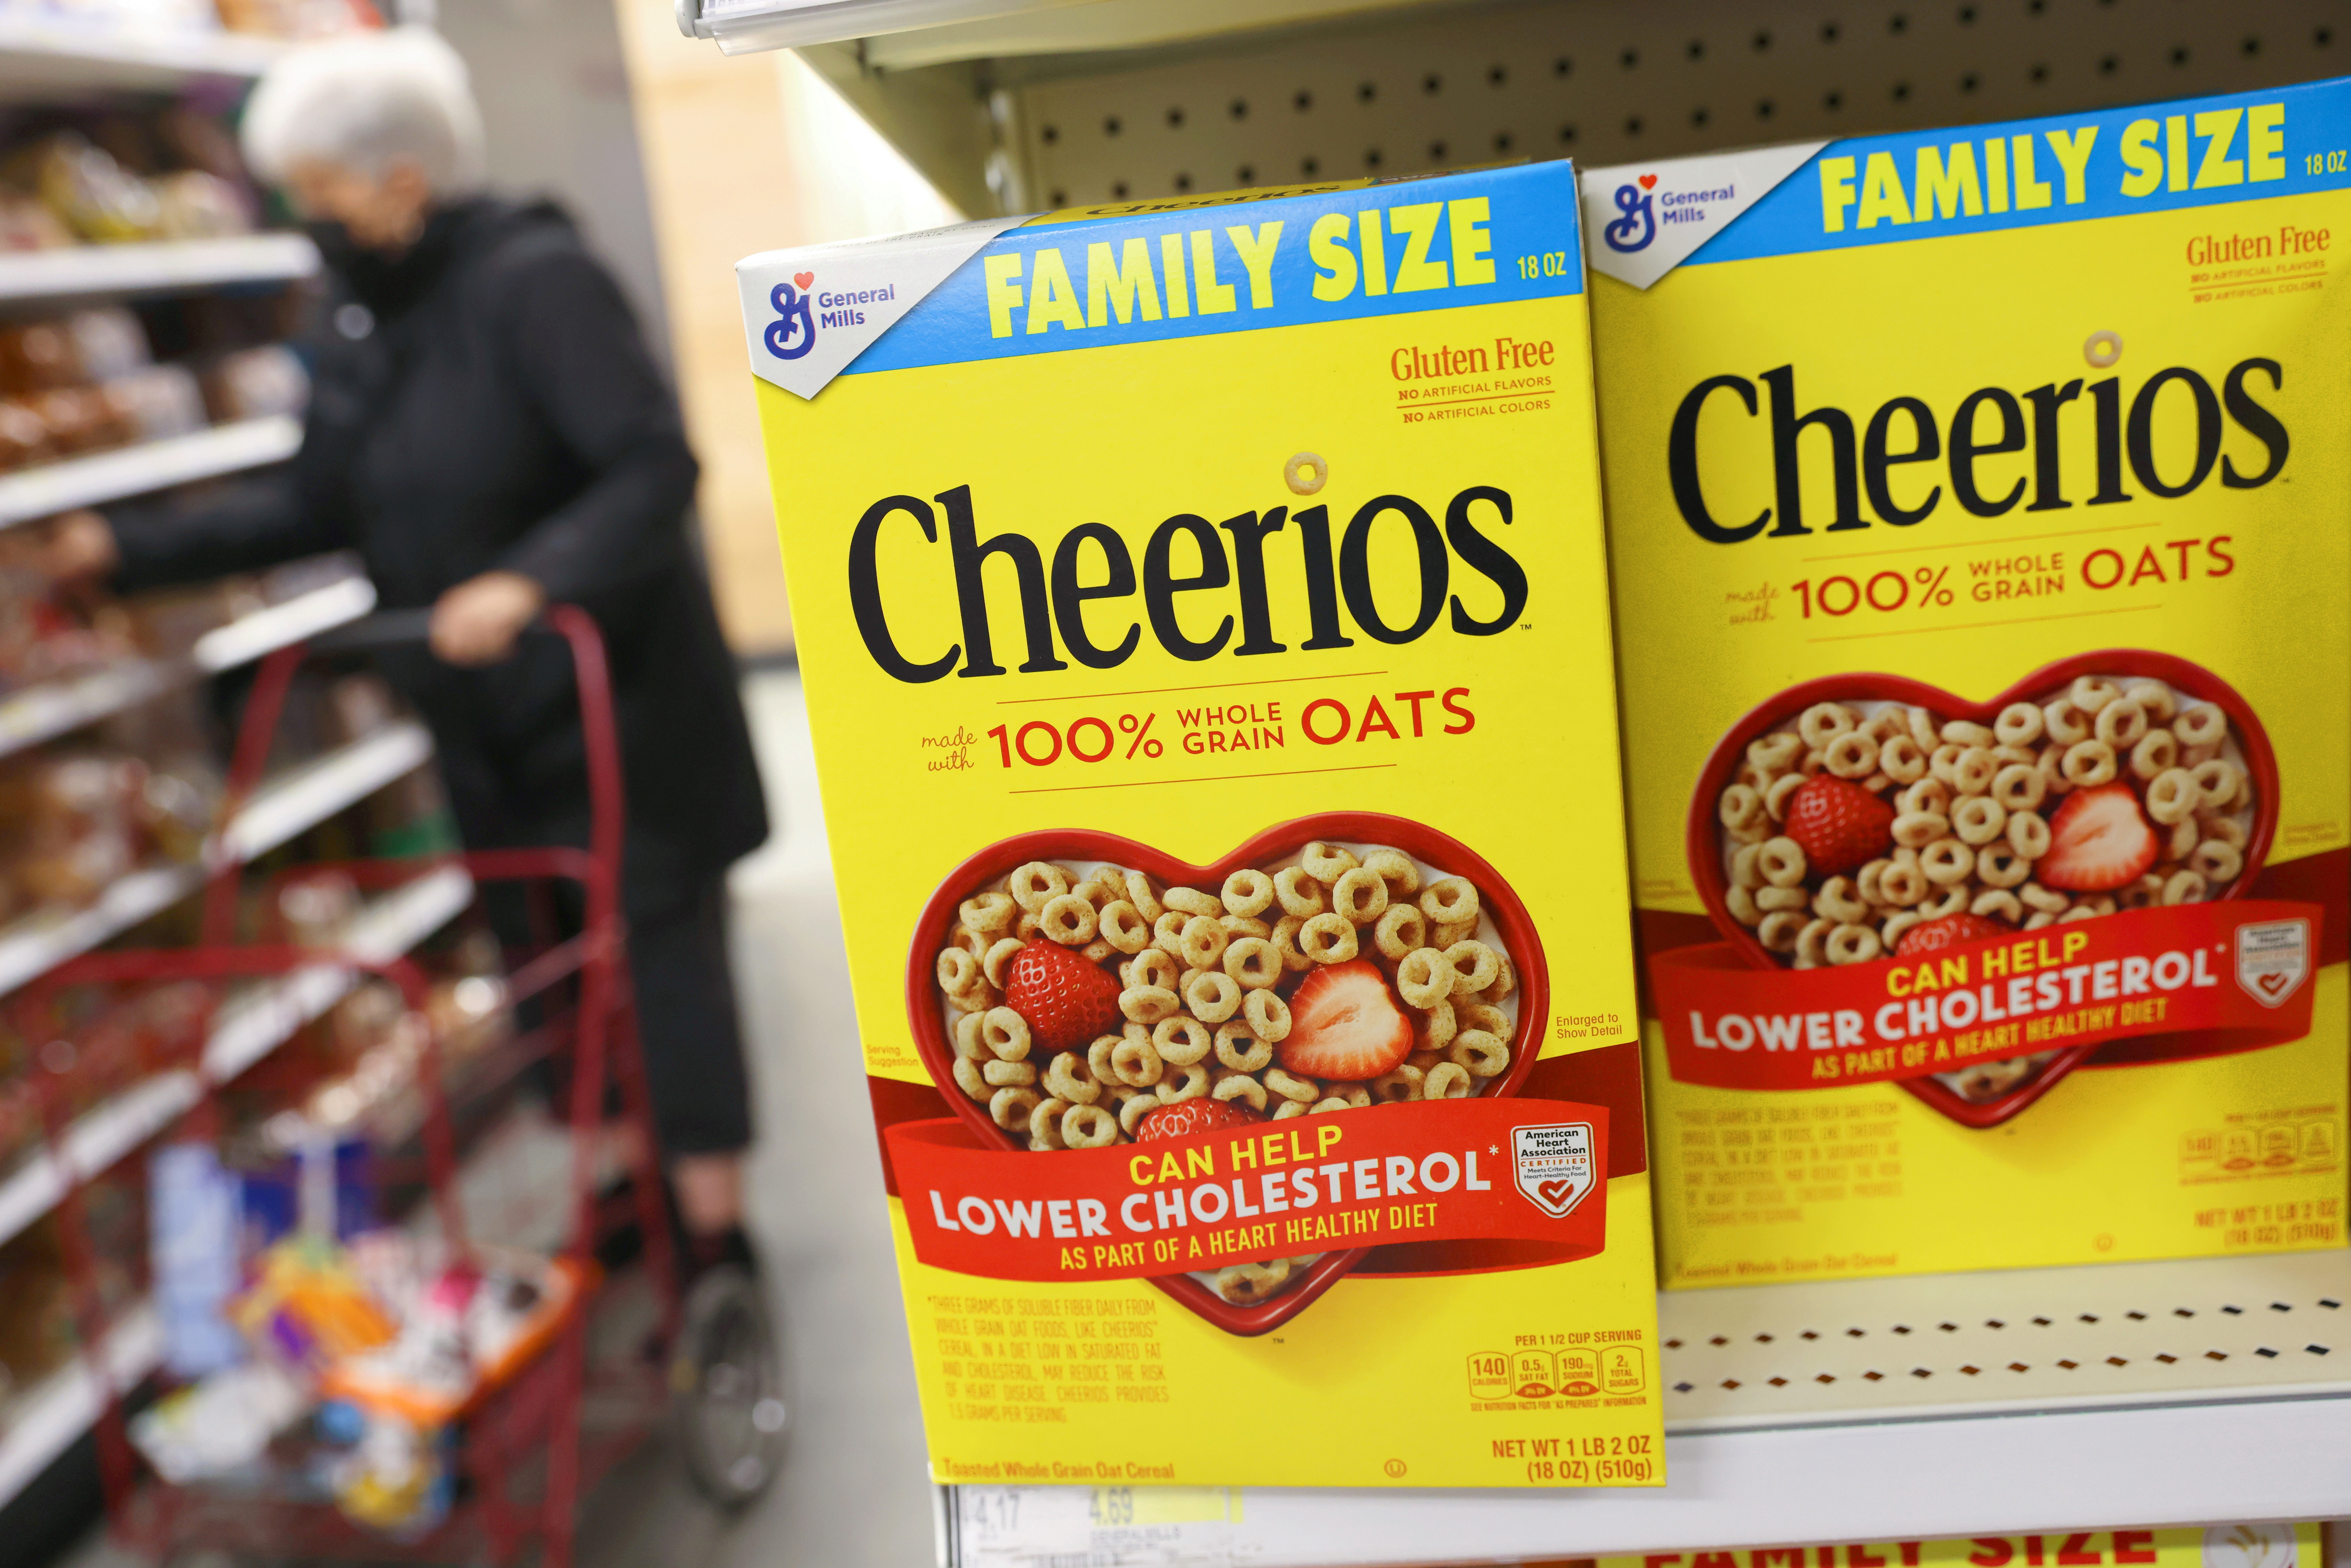 Packages of Cheerios, a brand owned by General Mills, are seen in a store in Manhattan, New York